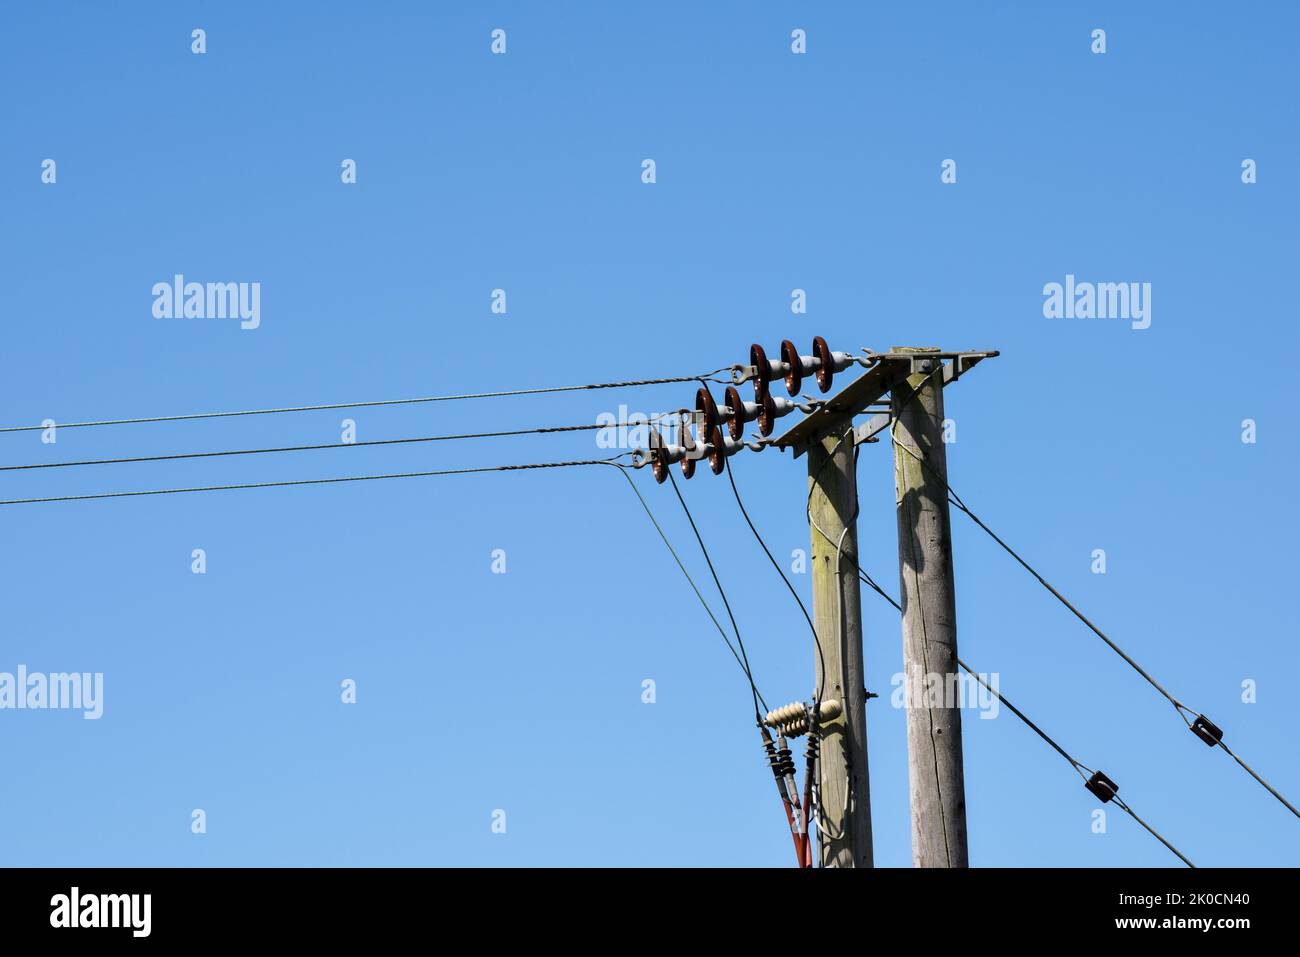 Power lines on blue sky background Stock Photo